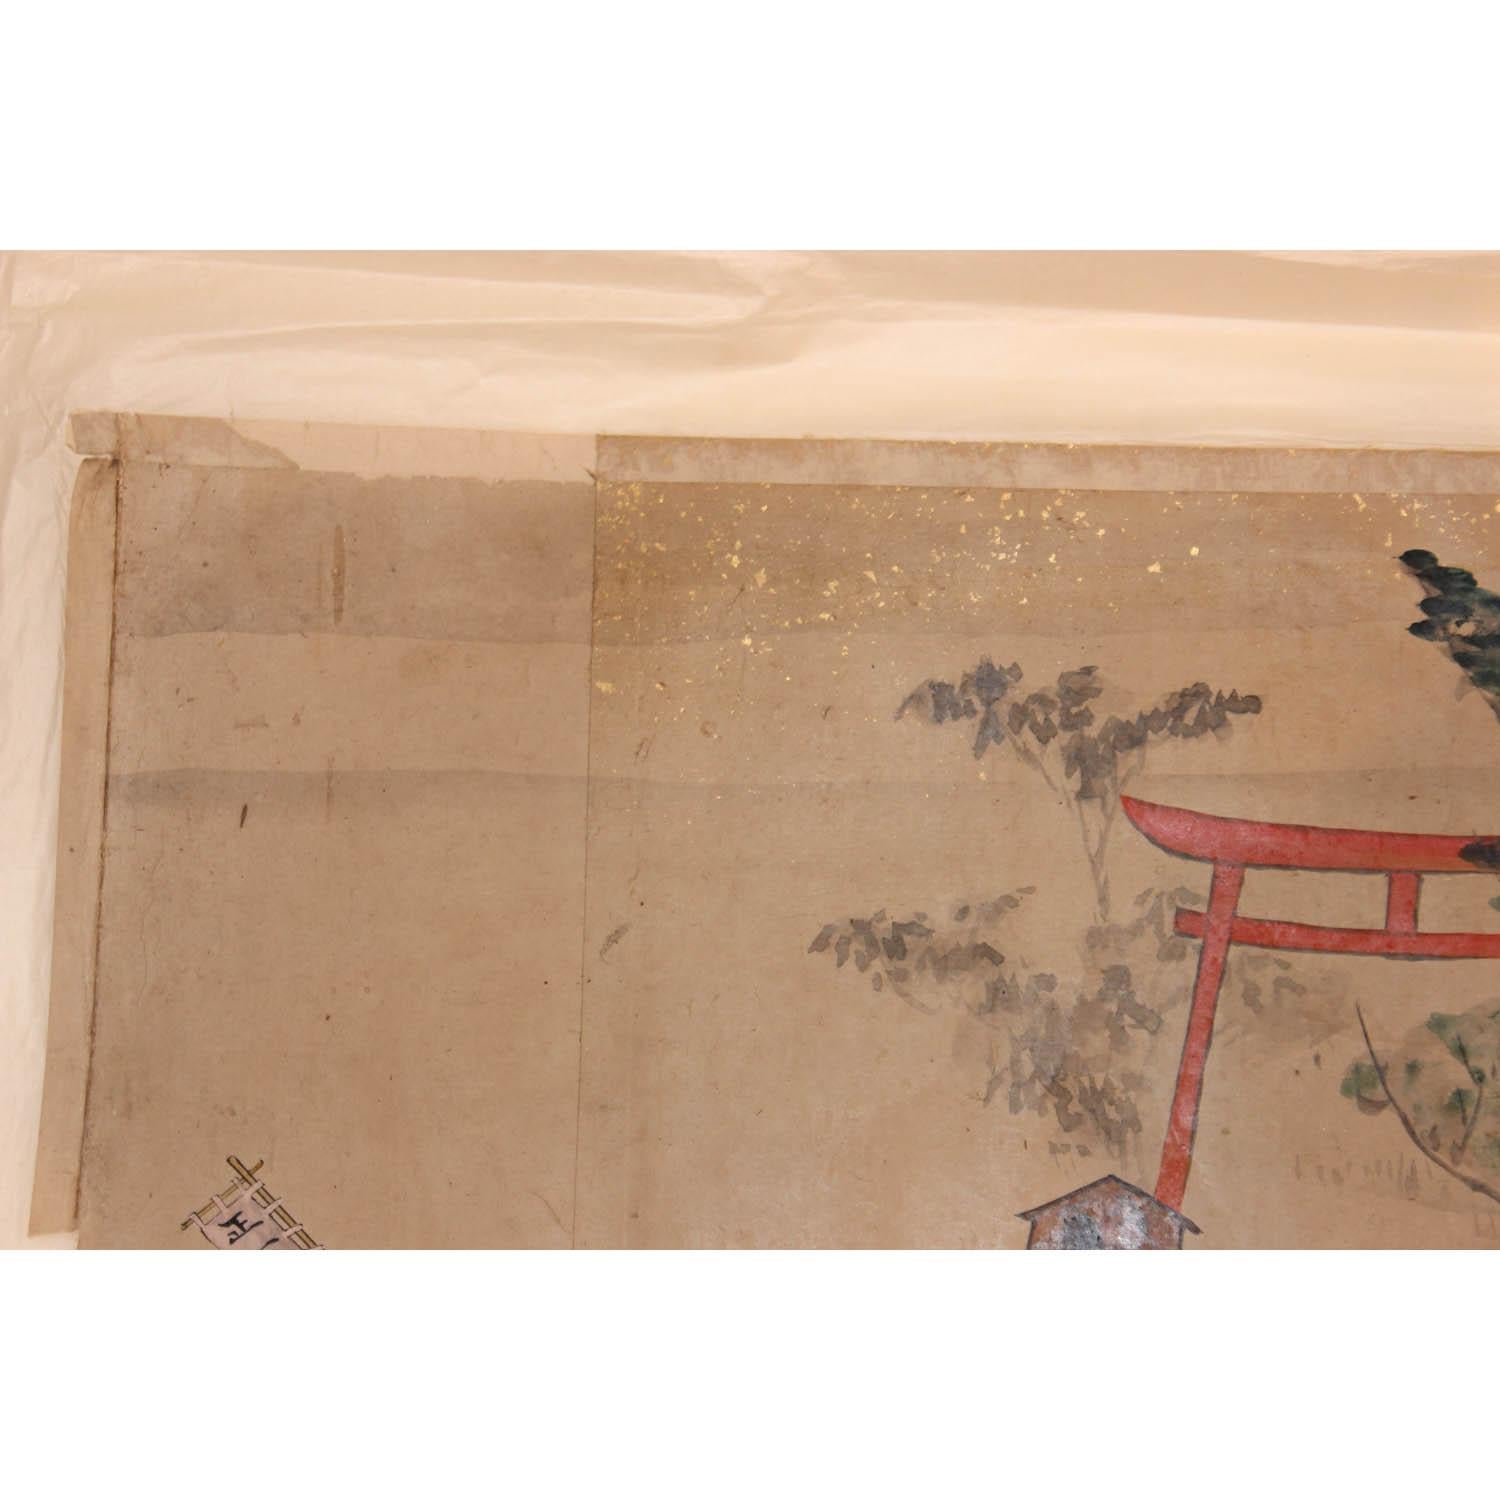 One in a series of hand painted scroll paintings recording a local harvest festival. This scroll panel depicts a traditional orange gate near the shrine where a priest is entering and carrying a horse ema (wooden plaque with written prayers), a